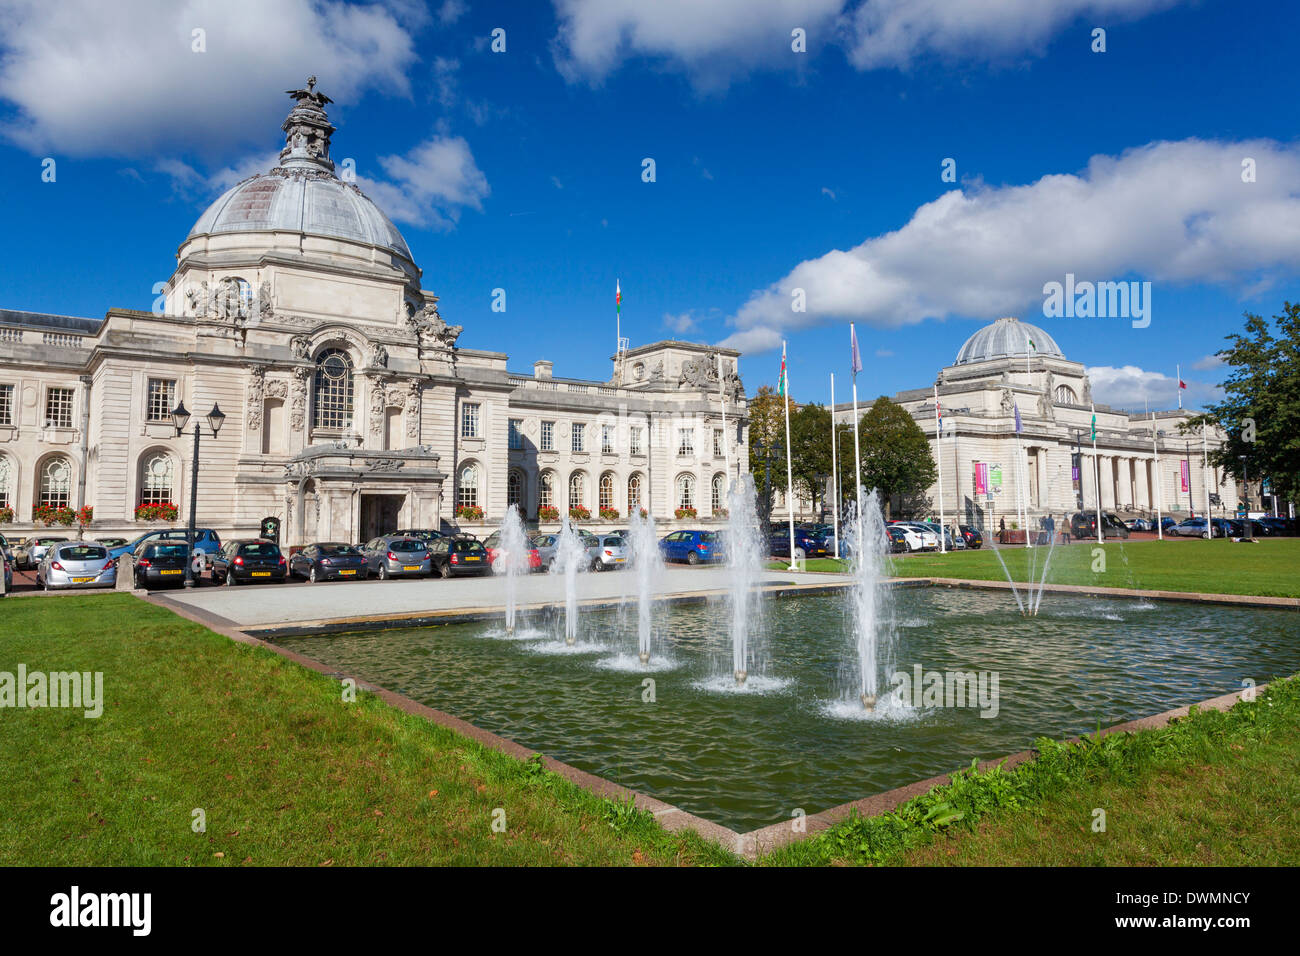 City Hall, The National Museum Of Wales, Cardiff Civic Centre, Wales, United Kingdom, Europe Stock Photo